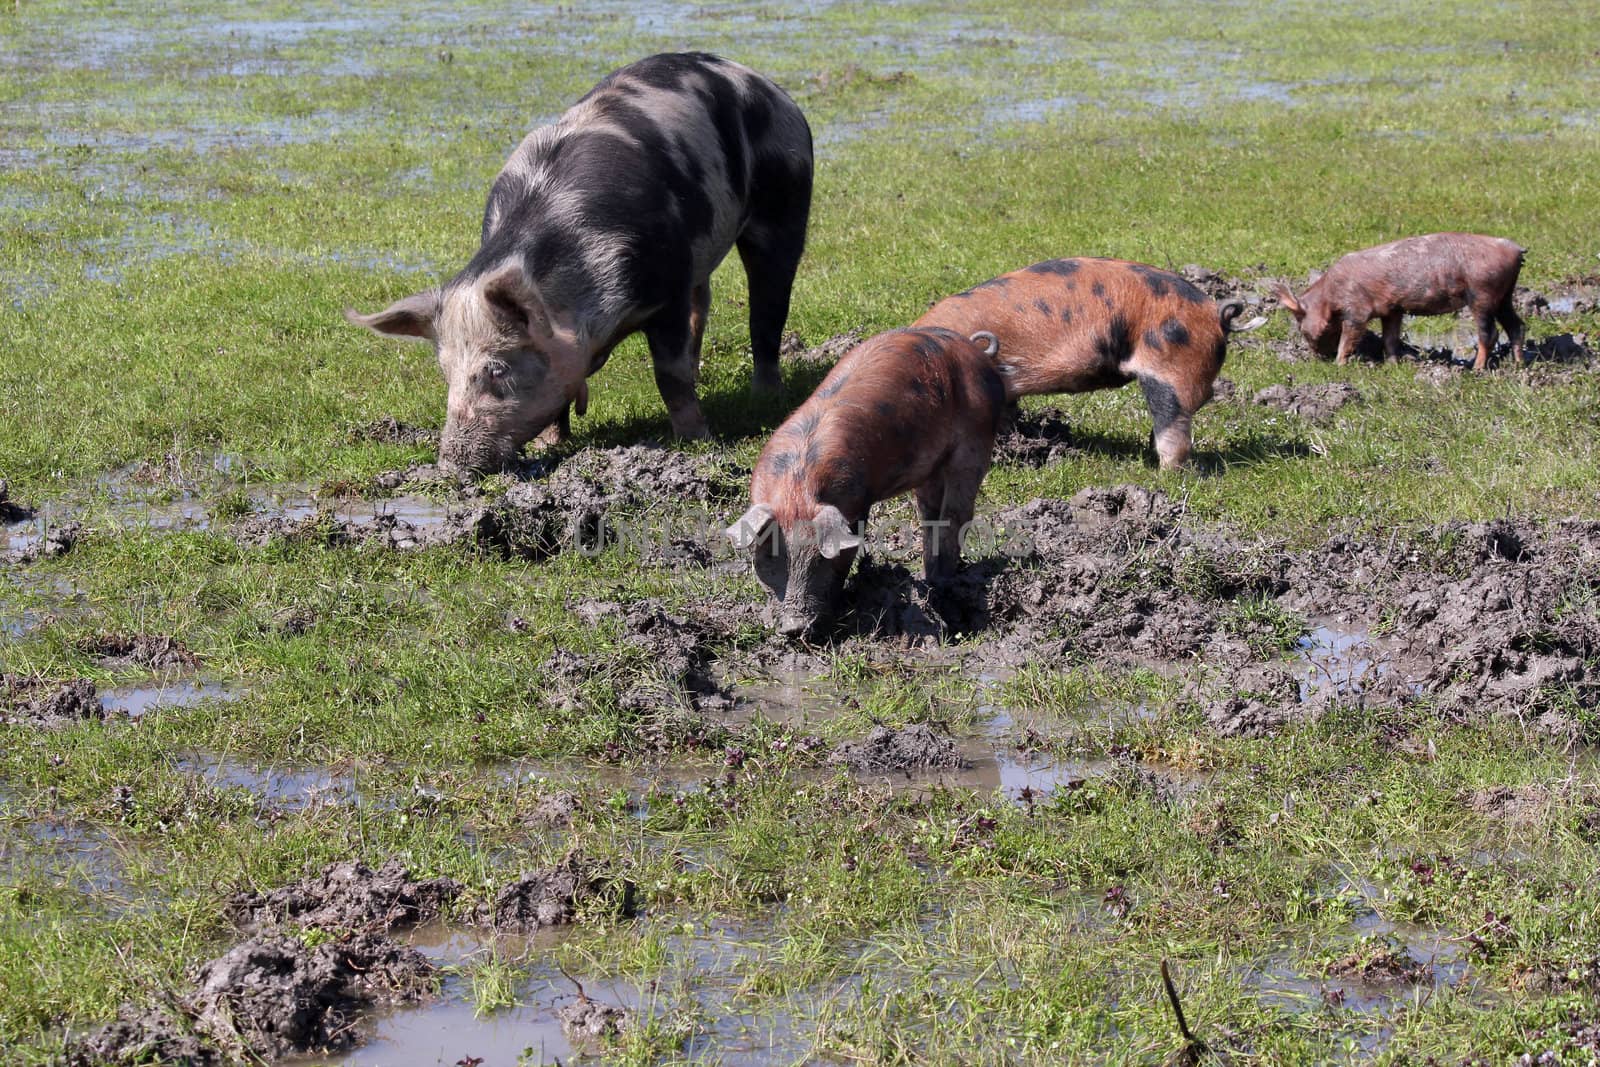 sow and little pigs in a mud by goce